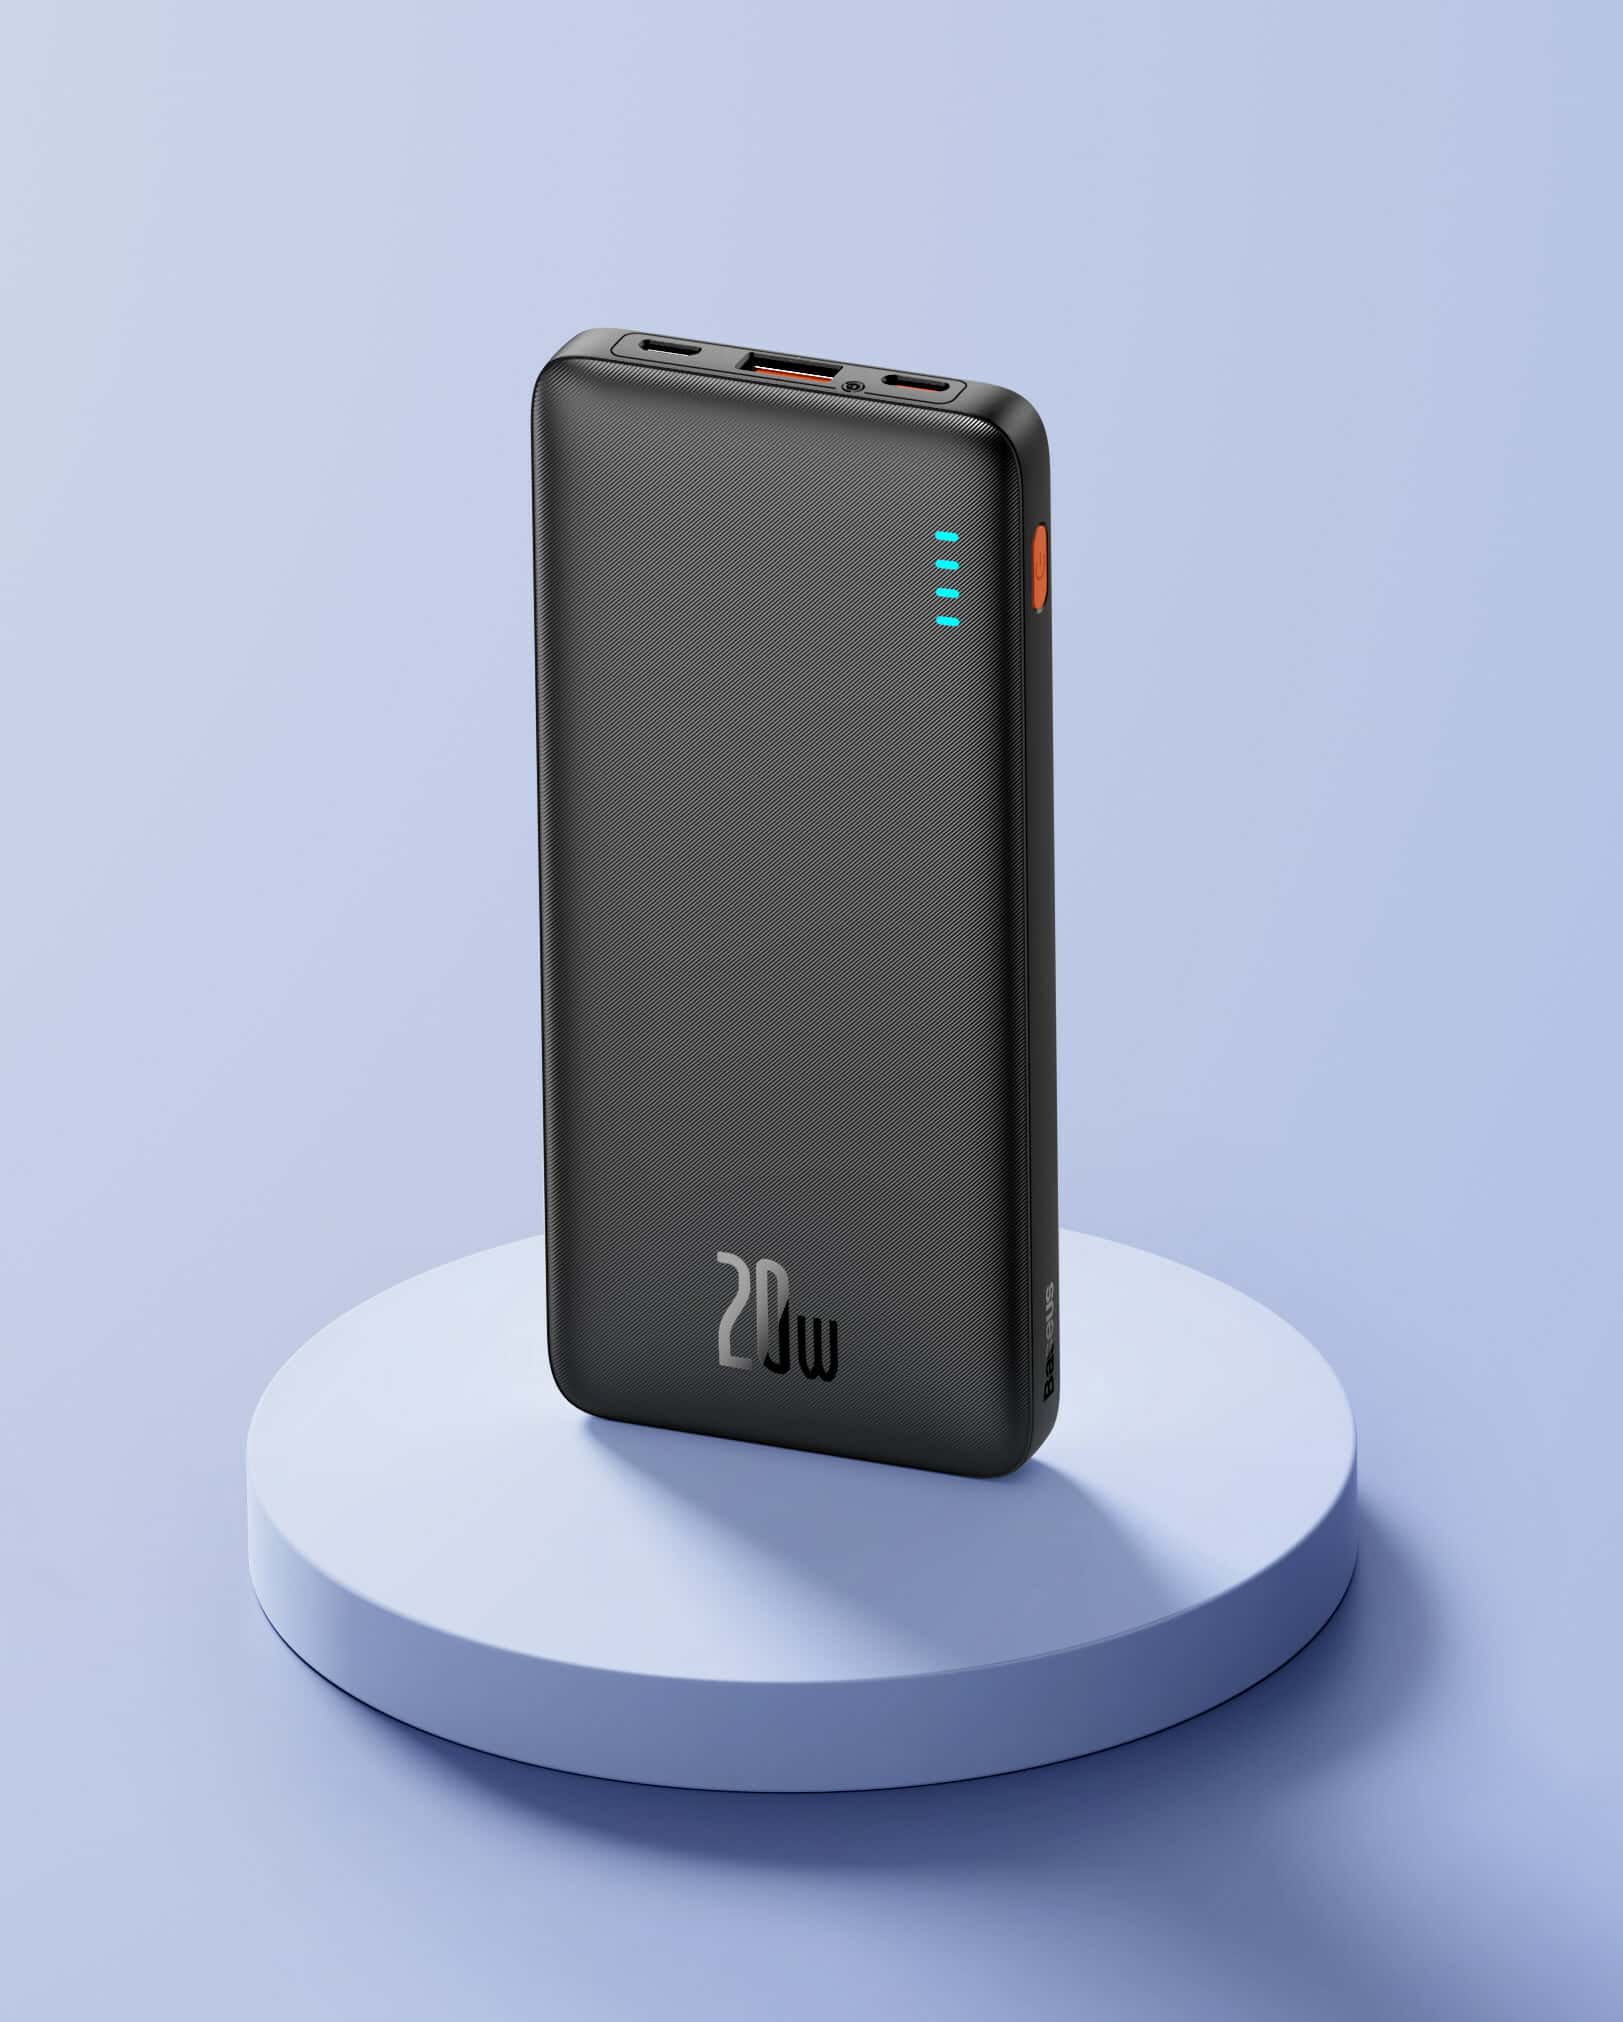 Baseus launches Airpow PD 20W fast charging power bank | BetaNews